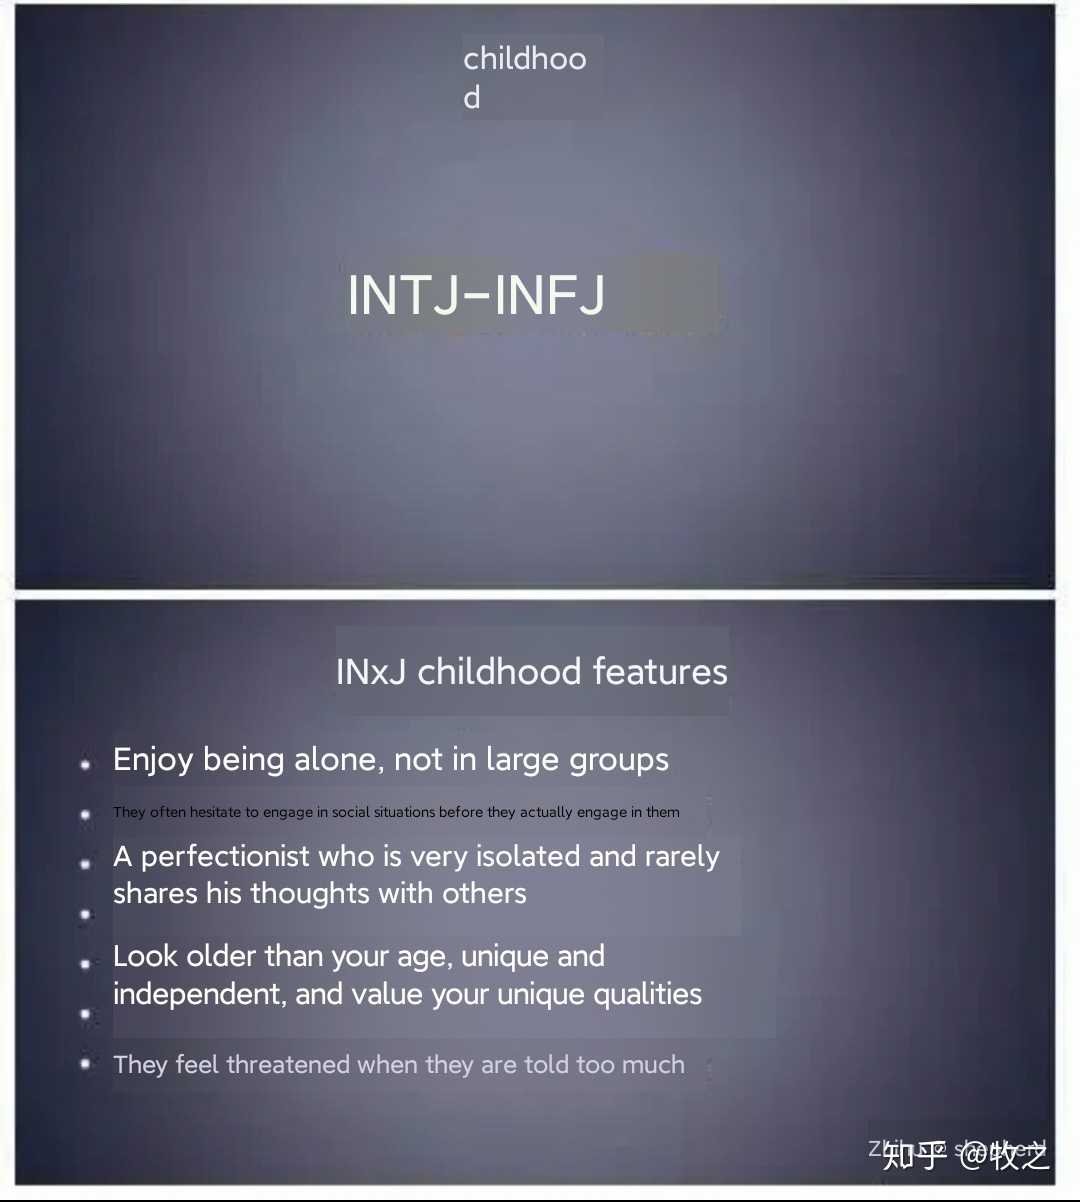 What is an INTJ and INFJ? I know that it has to do with my